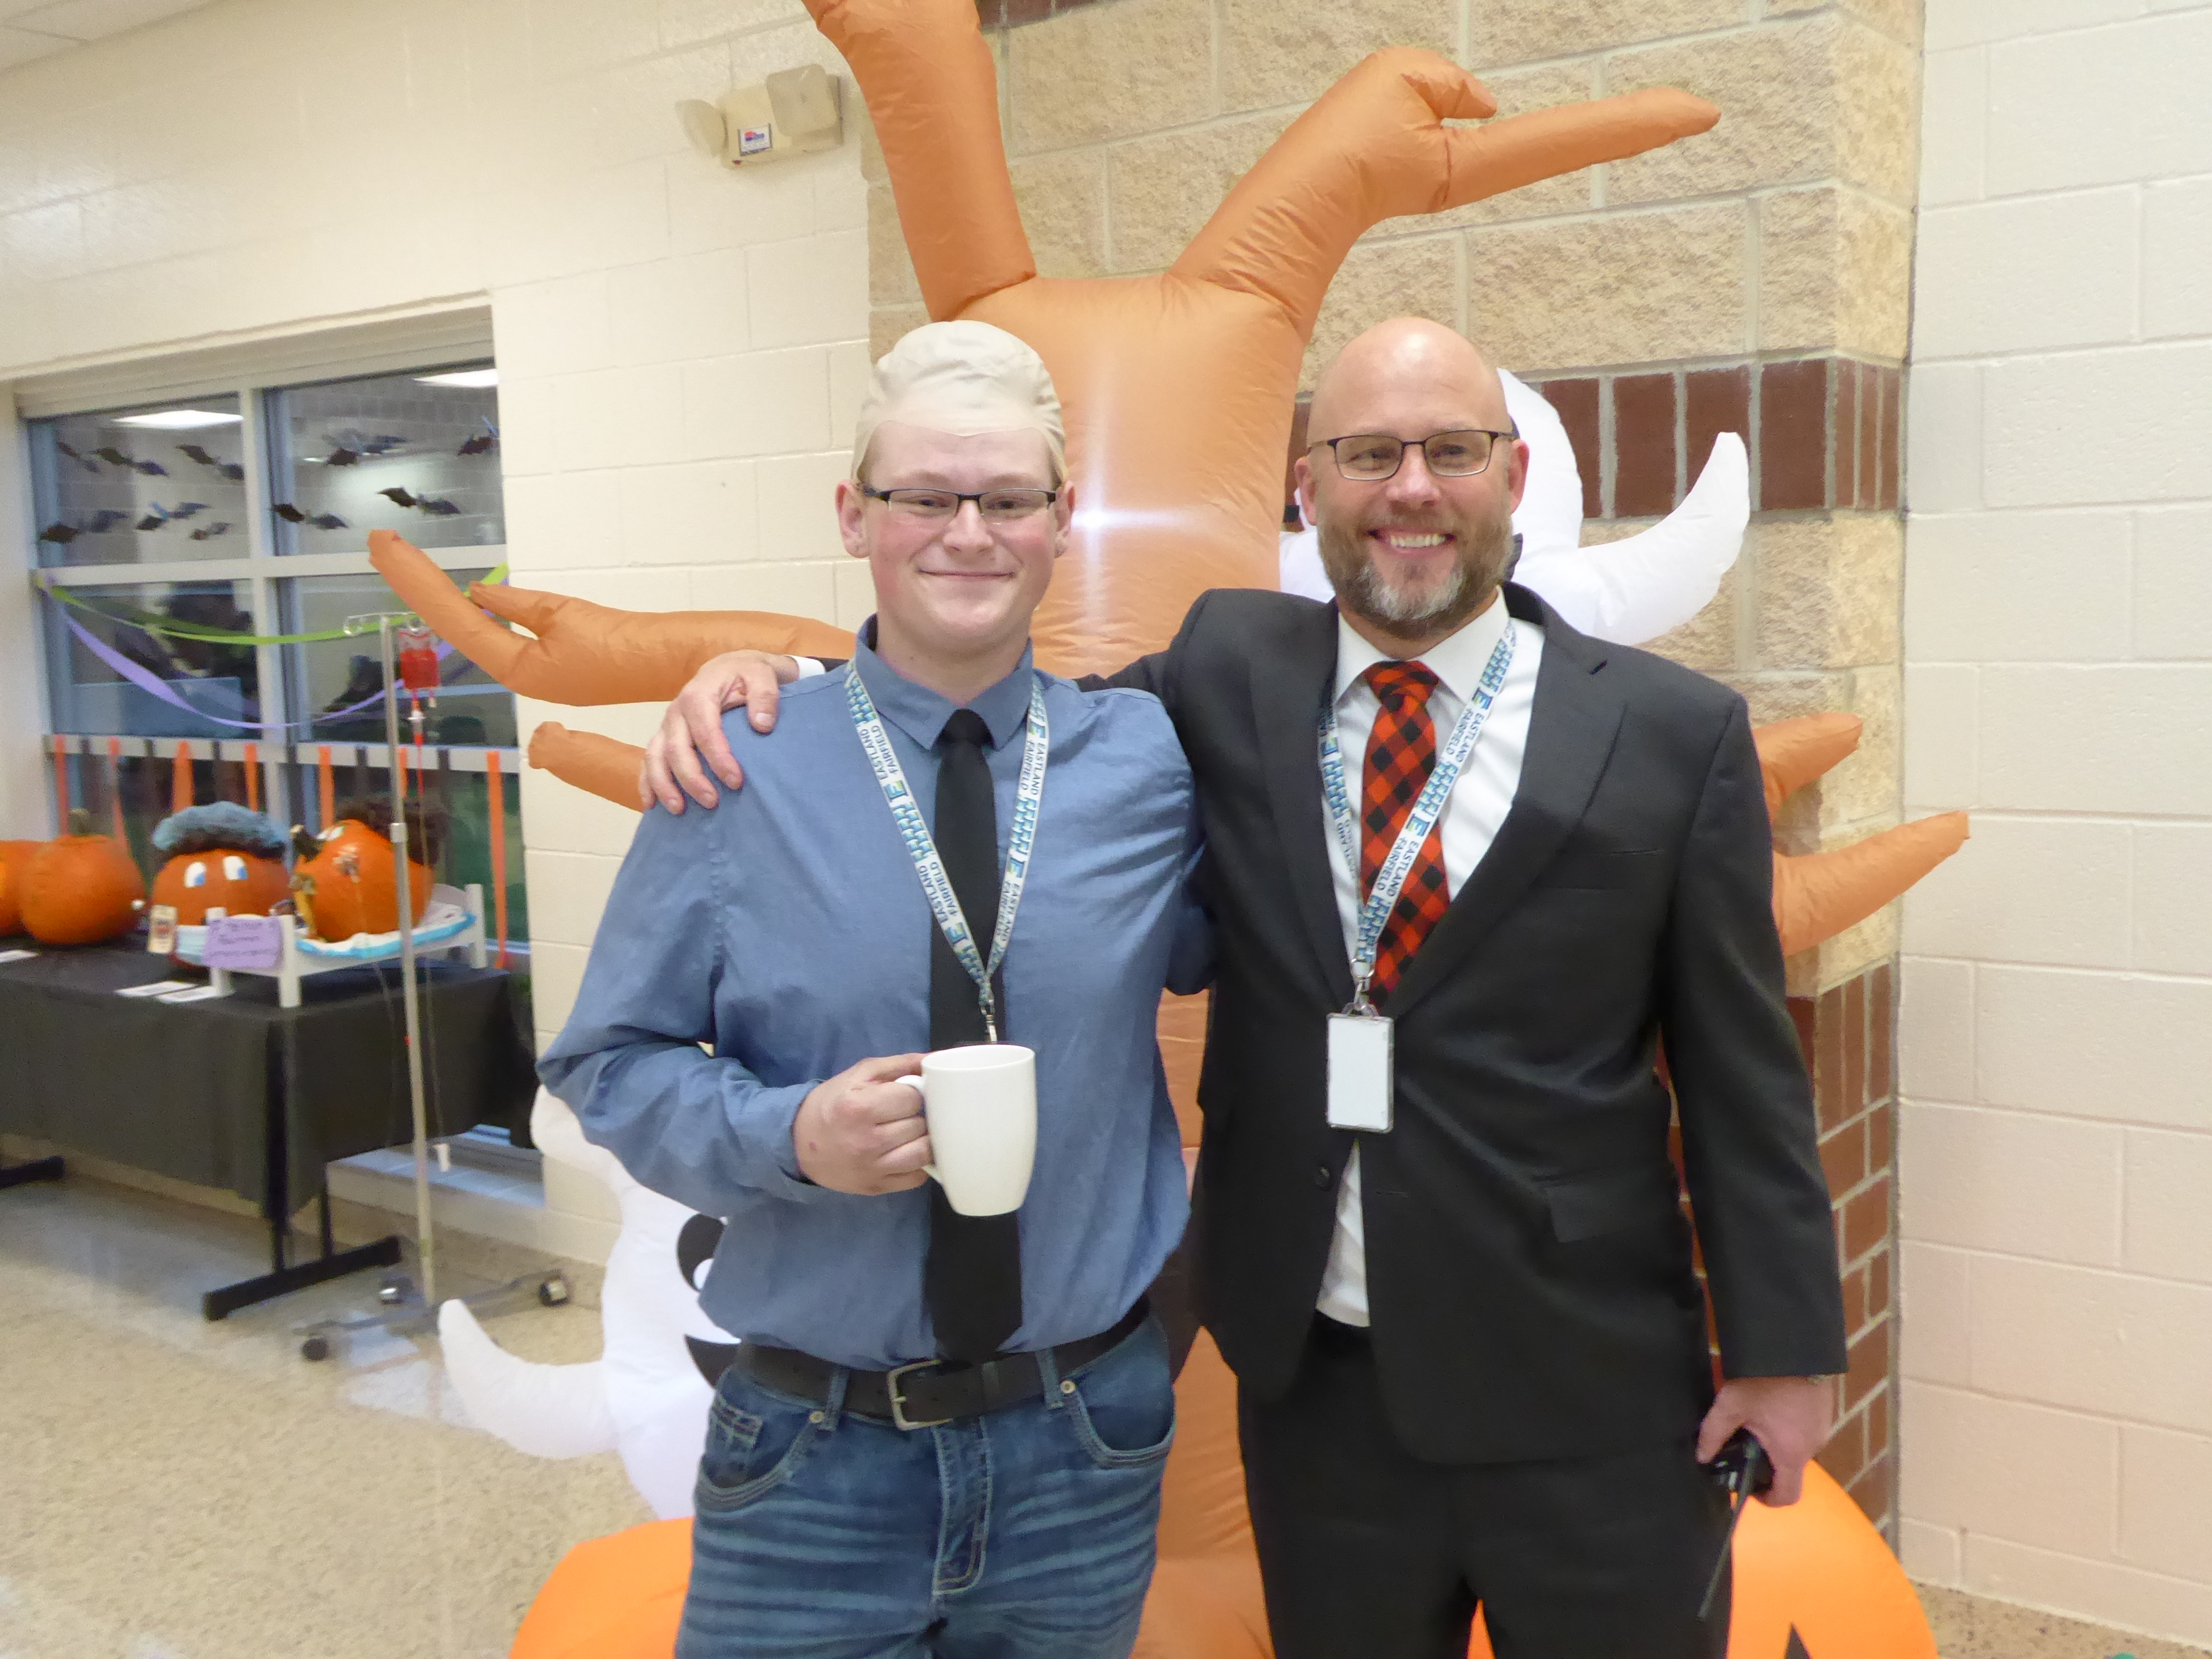 A student dresses as his principal, bald head and all.